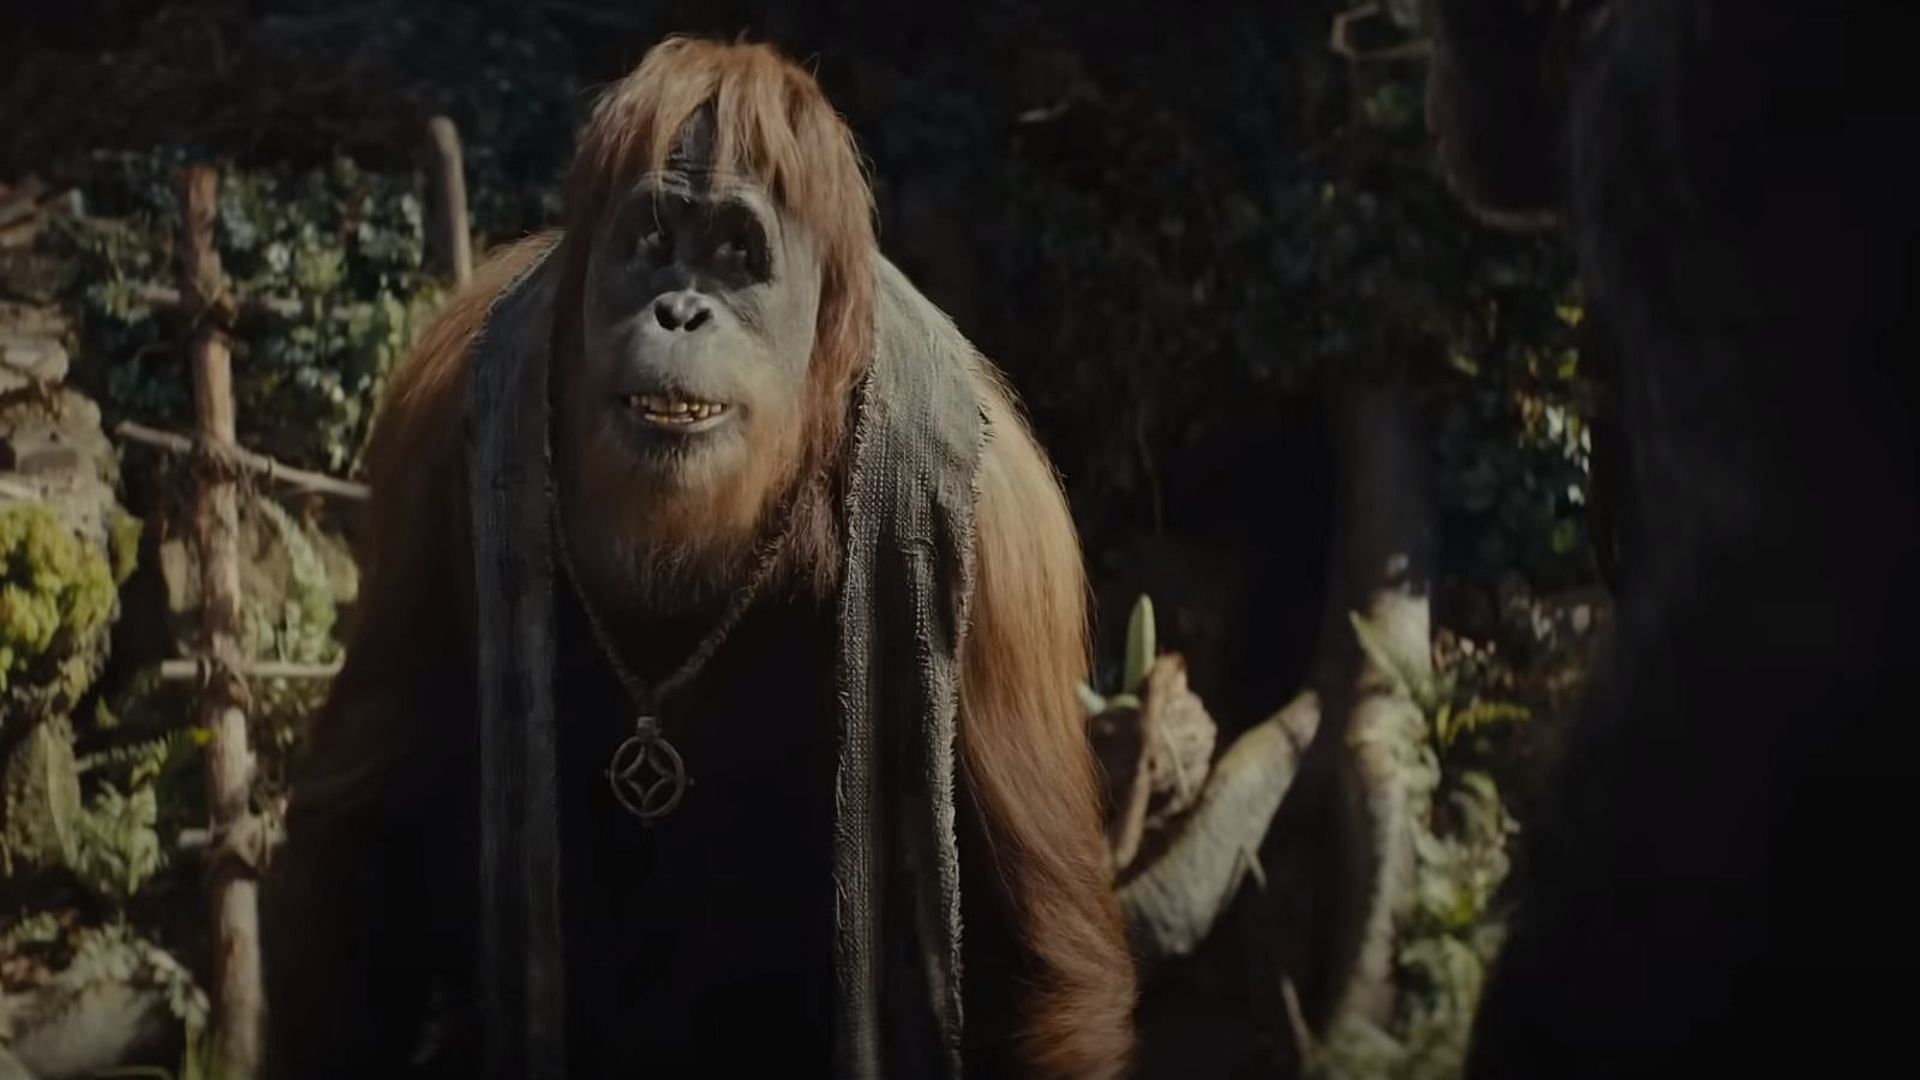 A still from Kingdom of the Planet of Apes. (Image: 20th Century Studios)